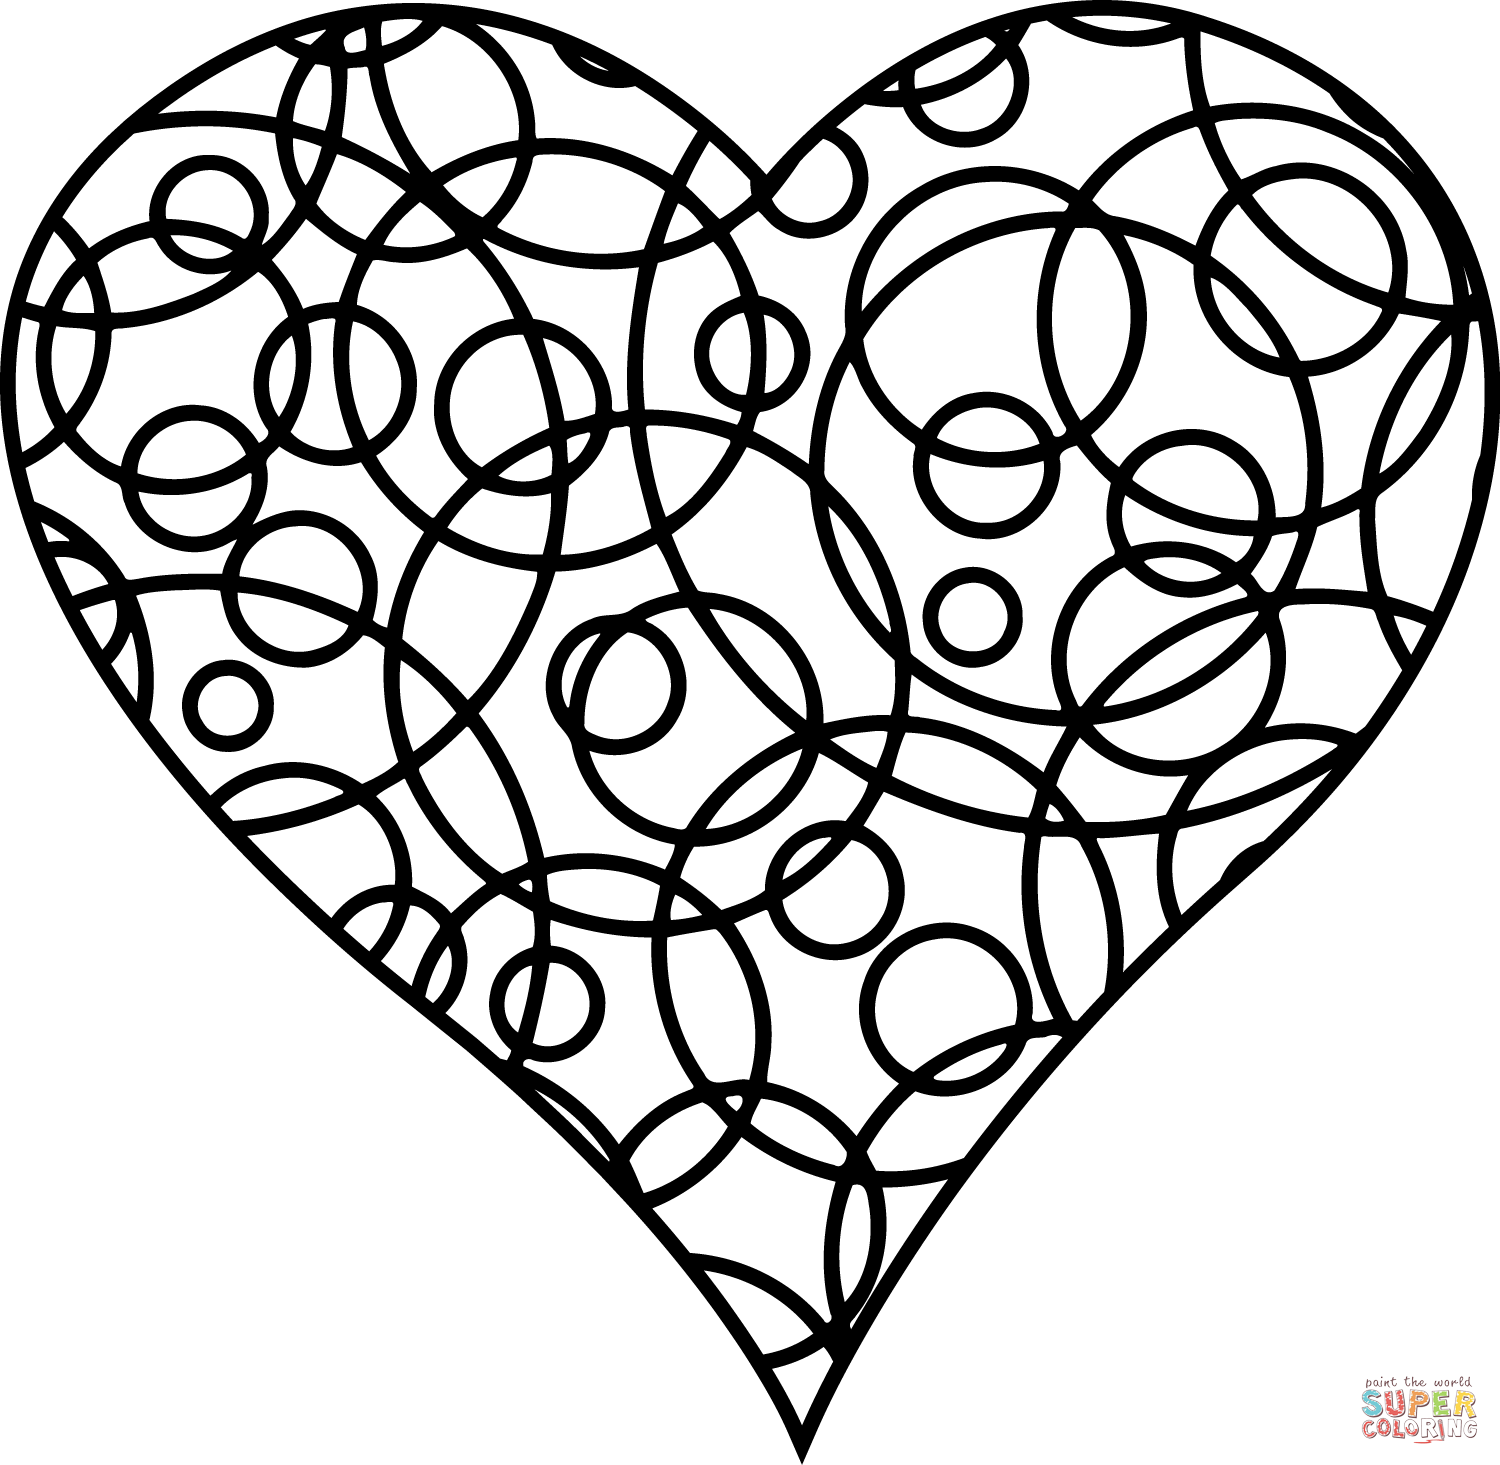 Patterned heart coloring page free printable coloring pages